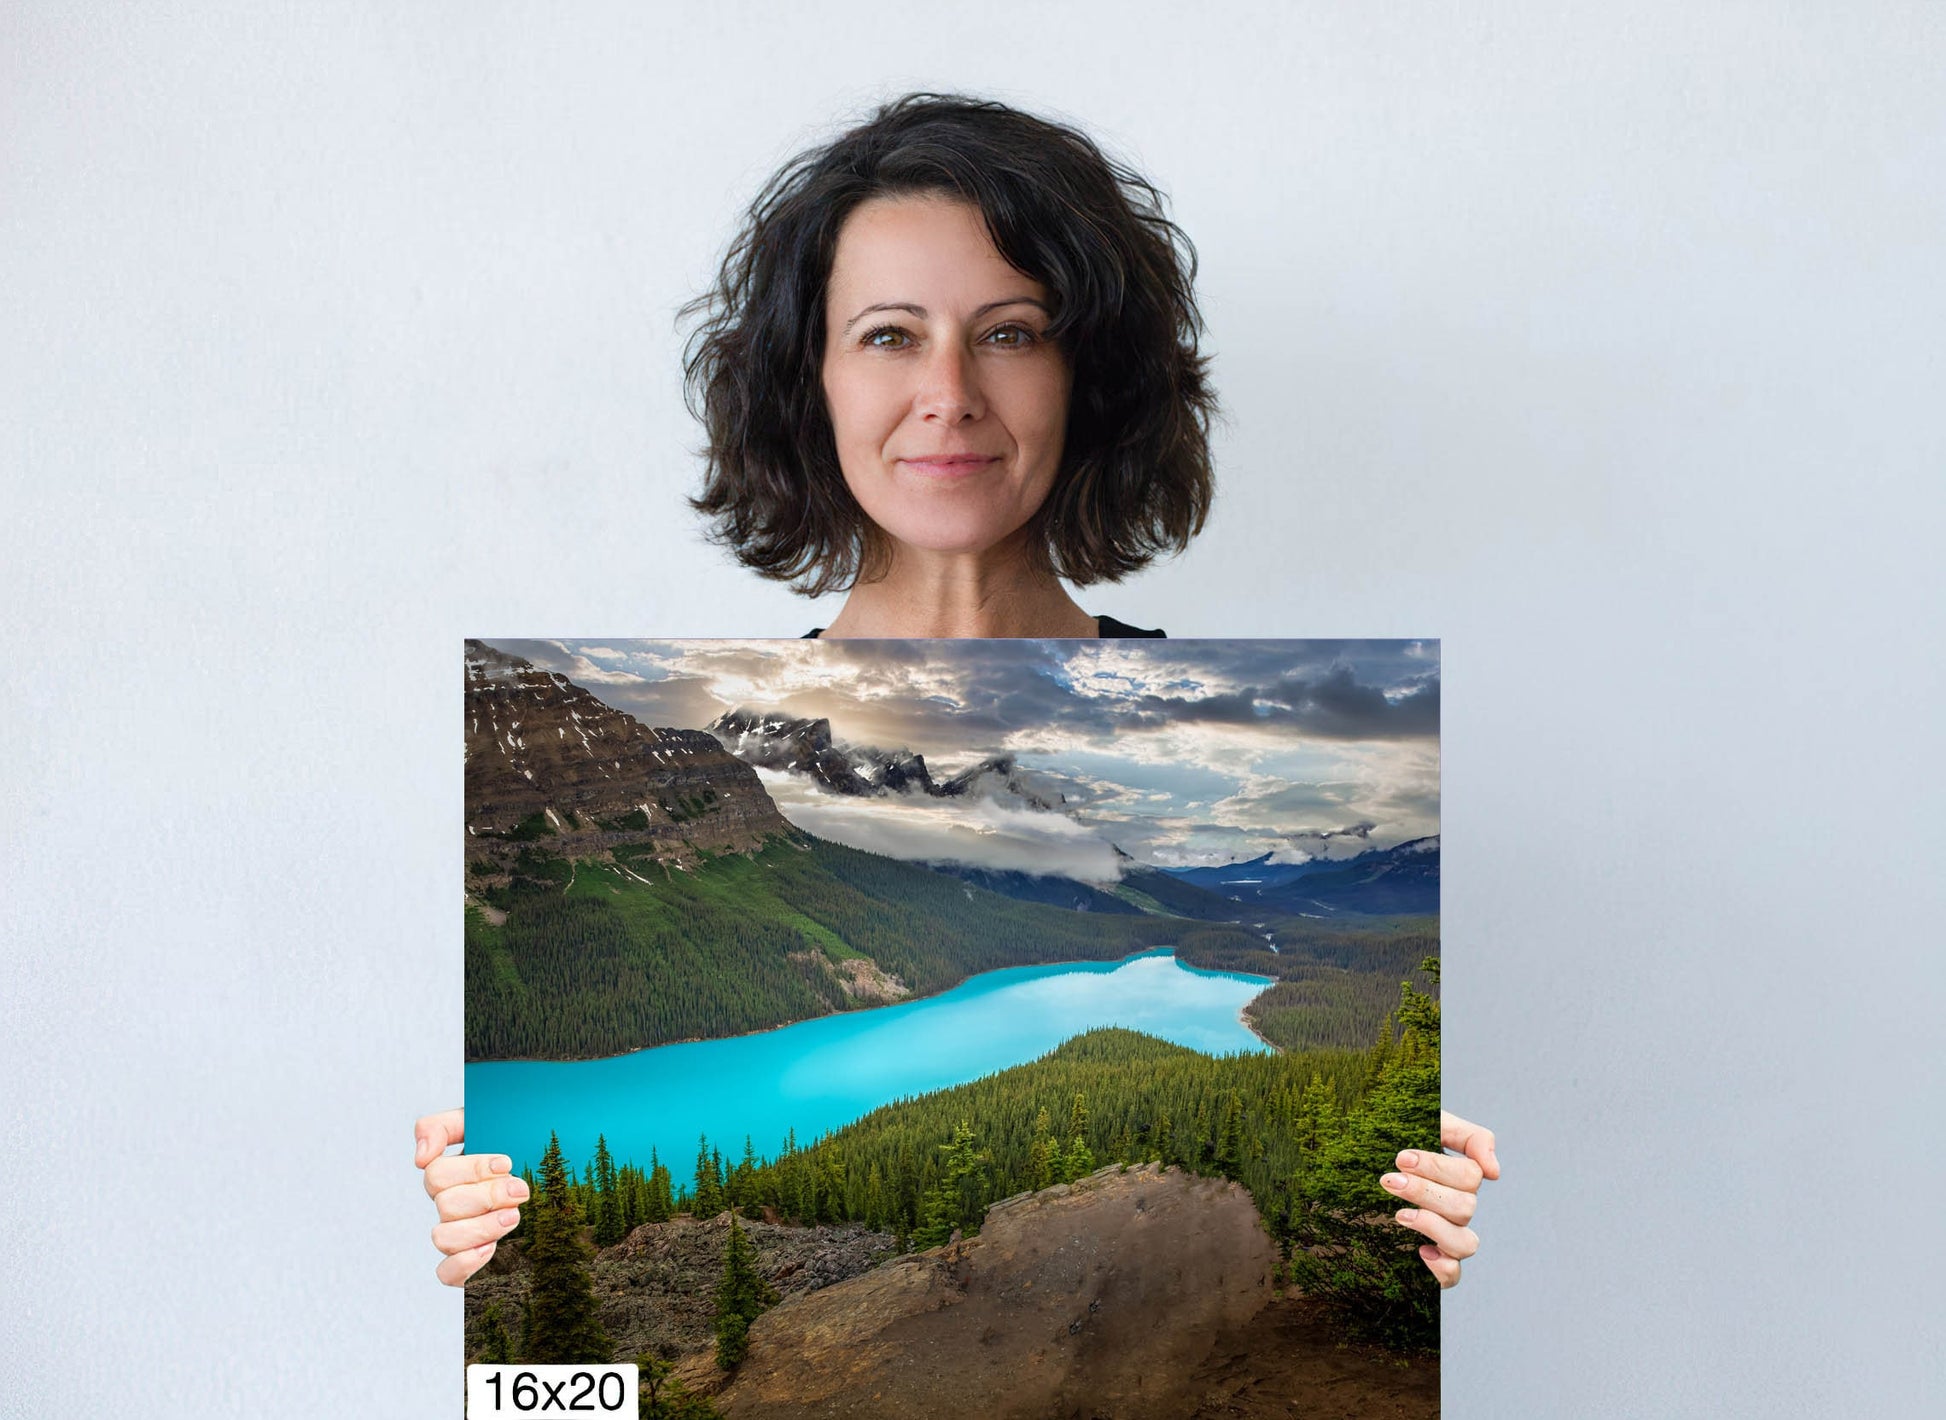 Woman holding a 16x20 caverns print of Peyto Lake in the Canadian Rockies. Shaped like a wolf, Peyto Lake has beautiful turquoise color. Beautiful wall decor for home or office. Available in canvas or paper print.